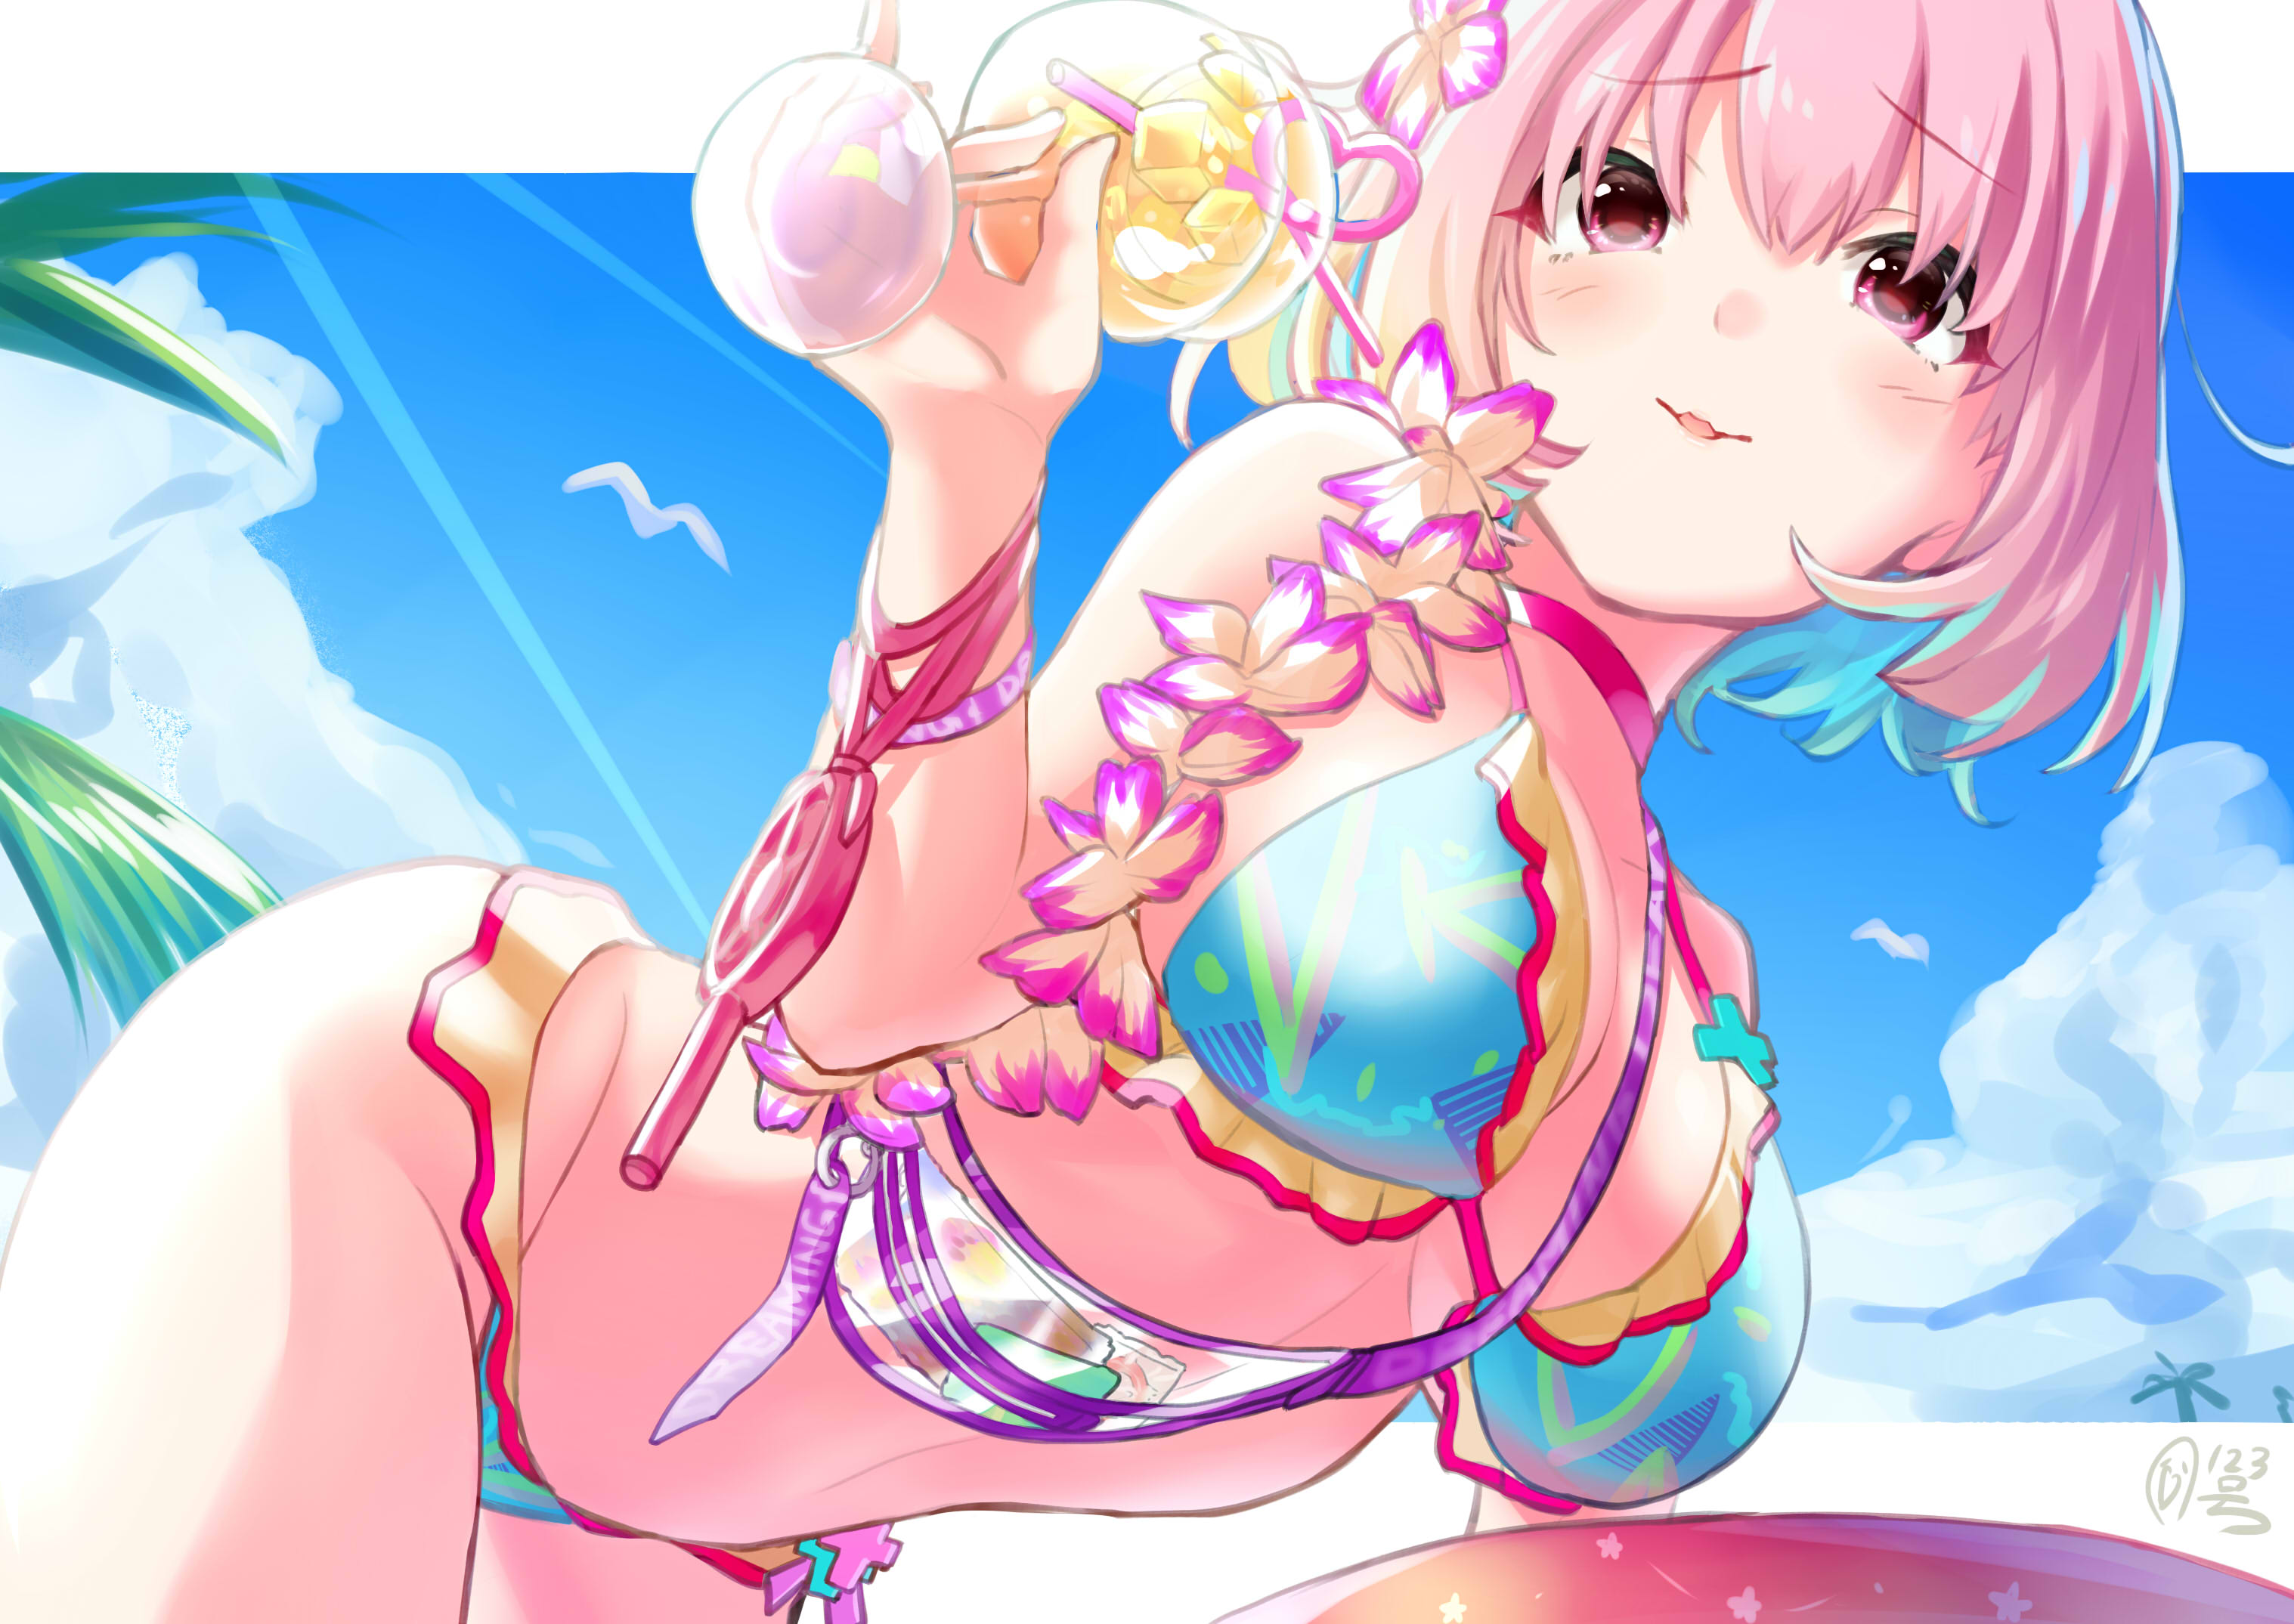 Anime 3035x2149 anime anime girls digital art artwork 2D THE iDOLM@STER: Cinderella Girls Riamu Yumemi low-angle cocktails flower in hair looking away palm trees bright